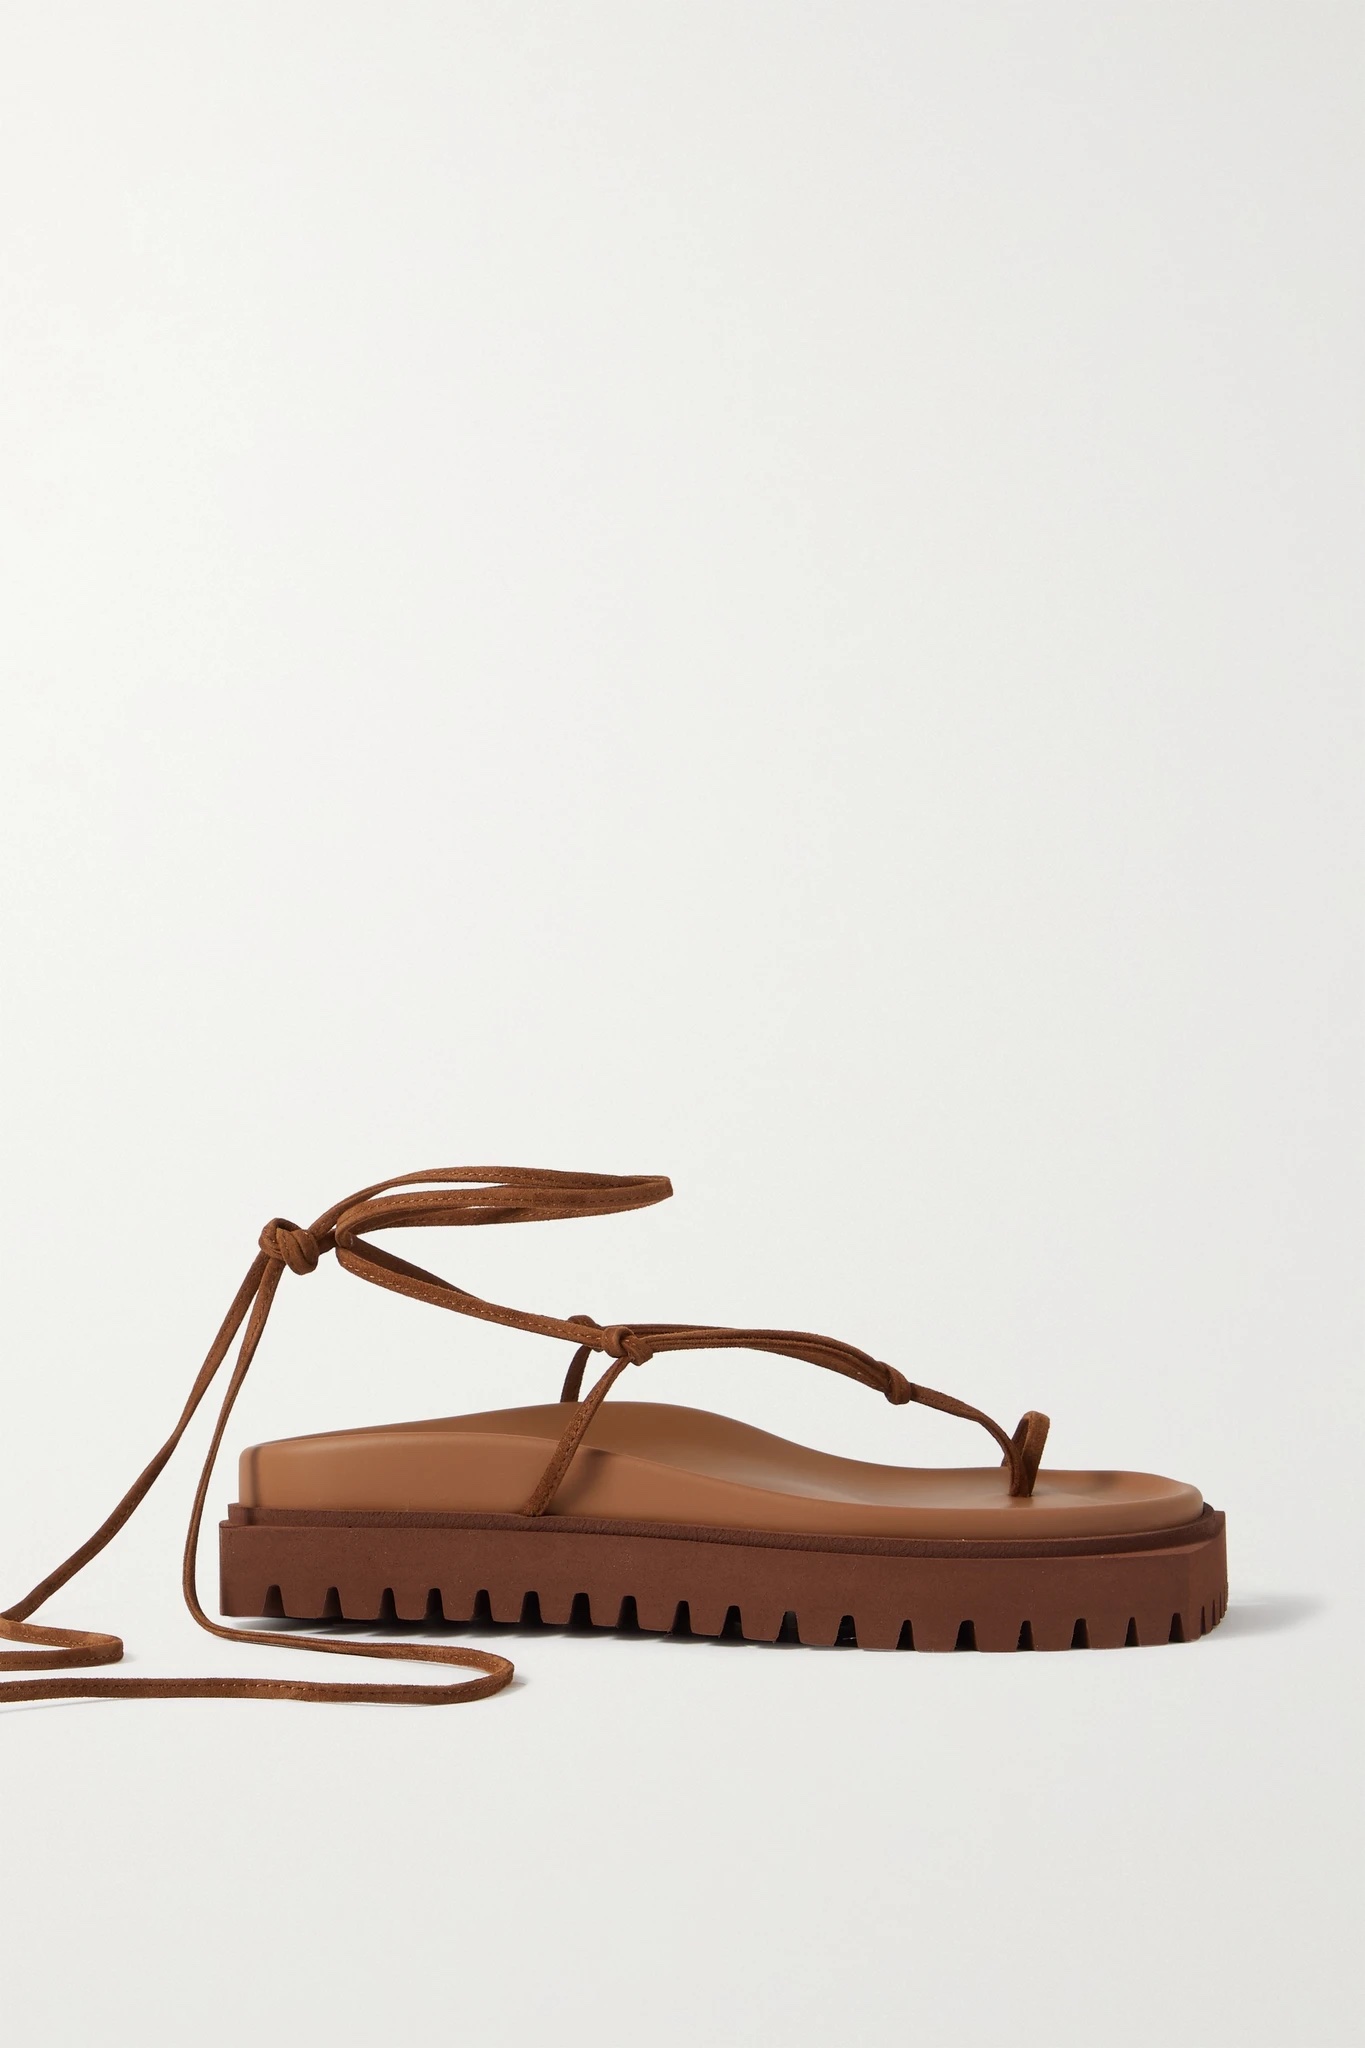 Platform Sandal Trend Is Officially The Shoe Of The Summer